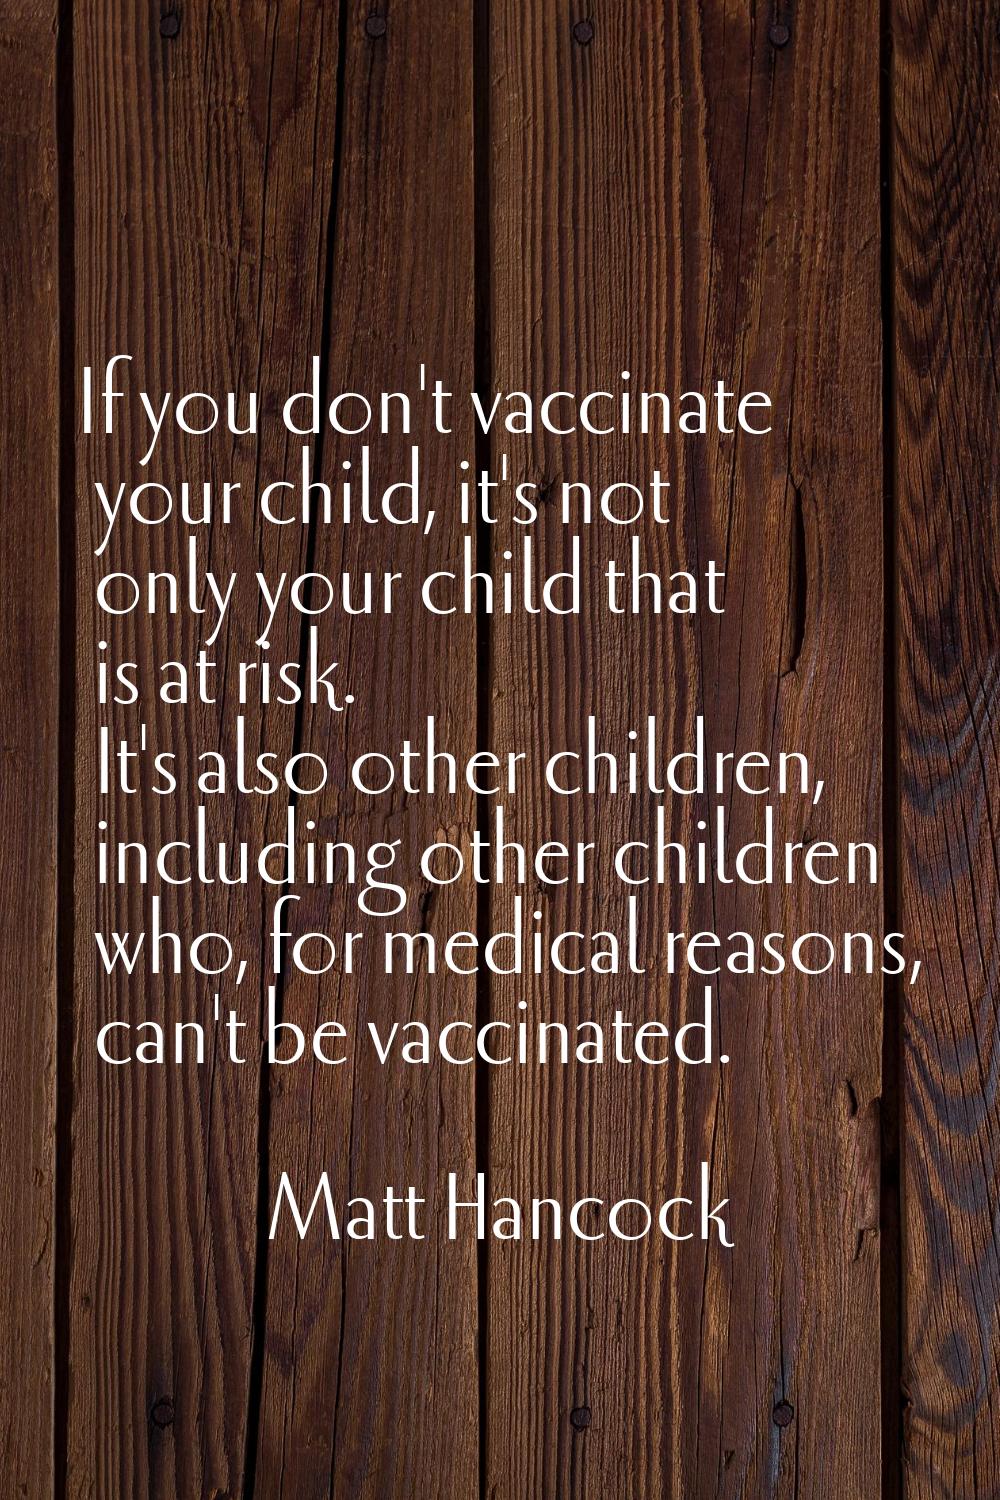 If you don't vaccinate your child, it's not only your child that is at risk. It's also other childr